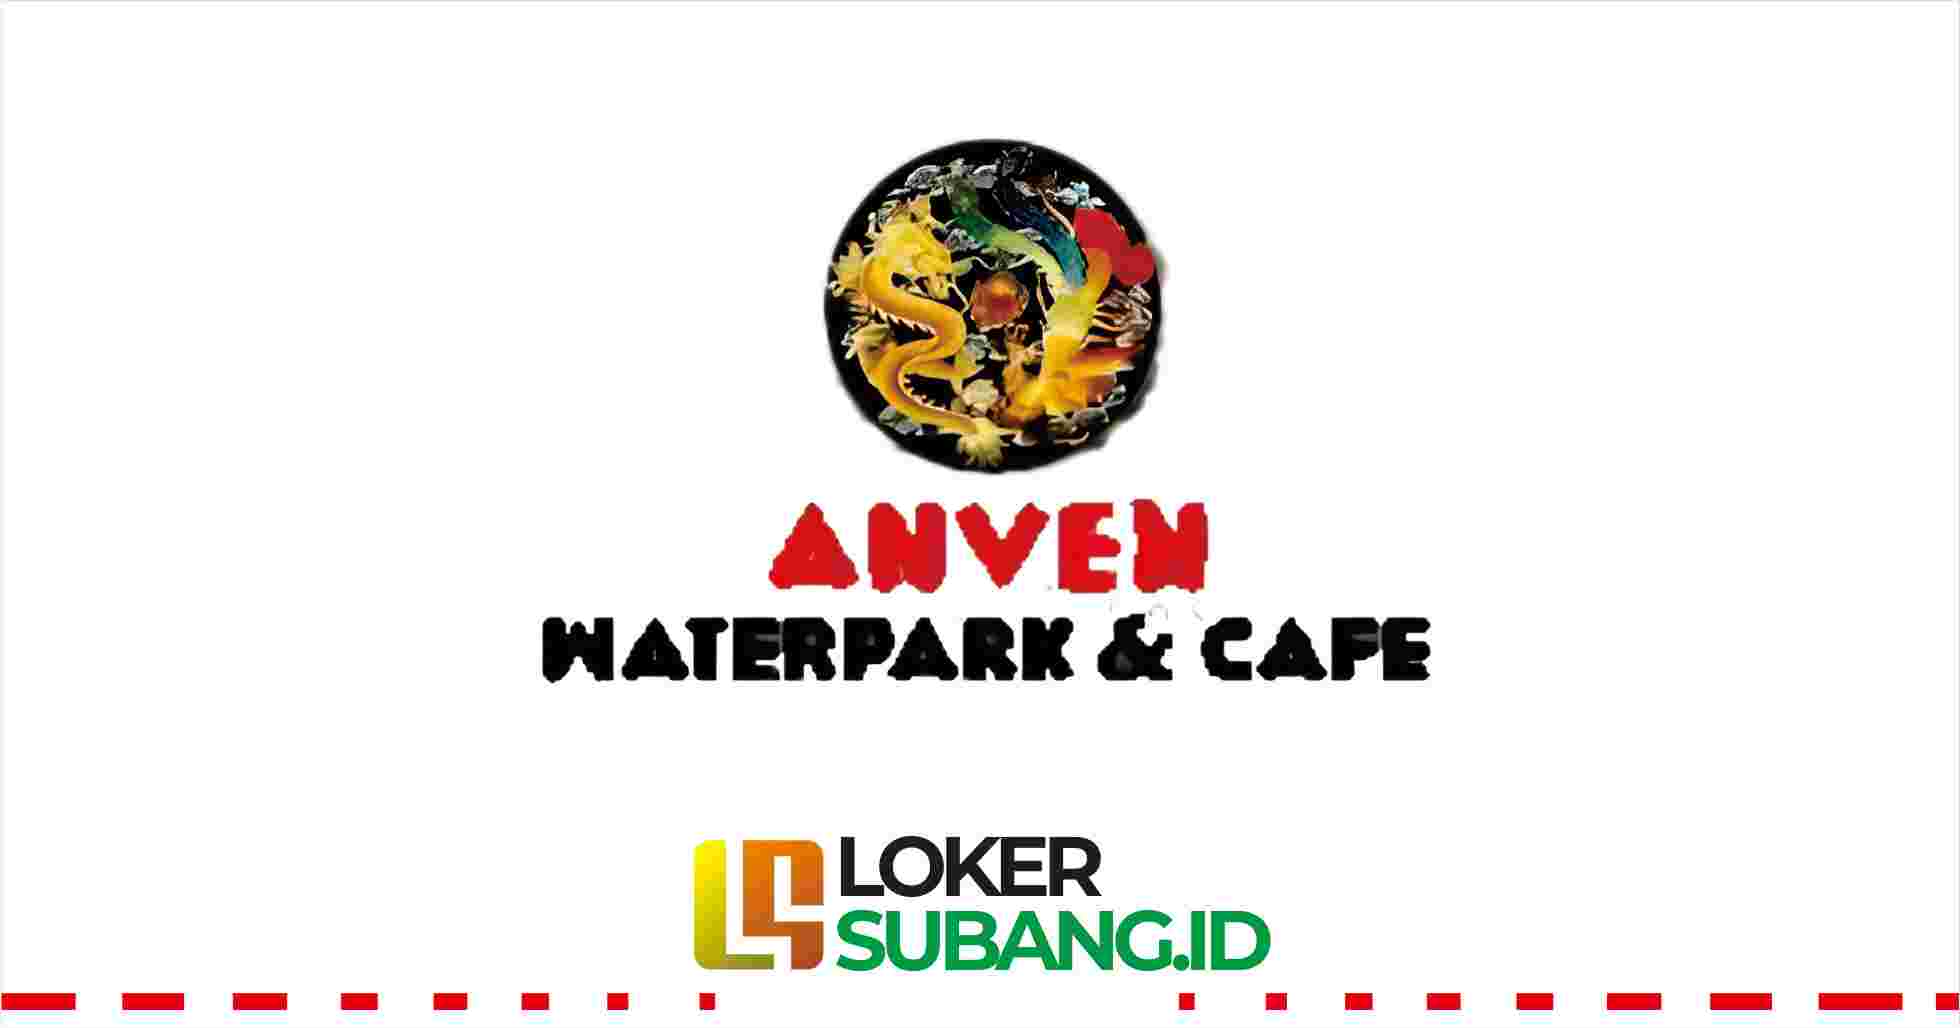 Anven Waterpark & Cafe